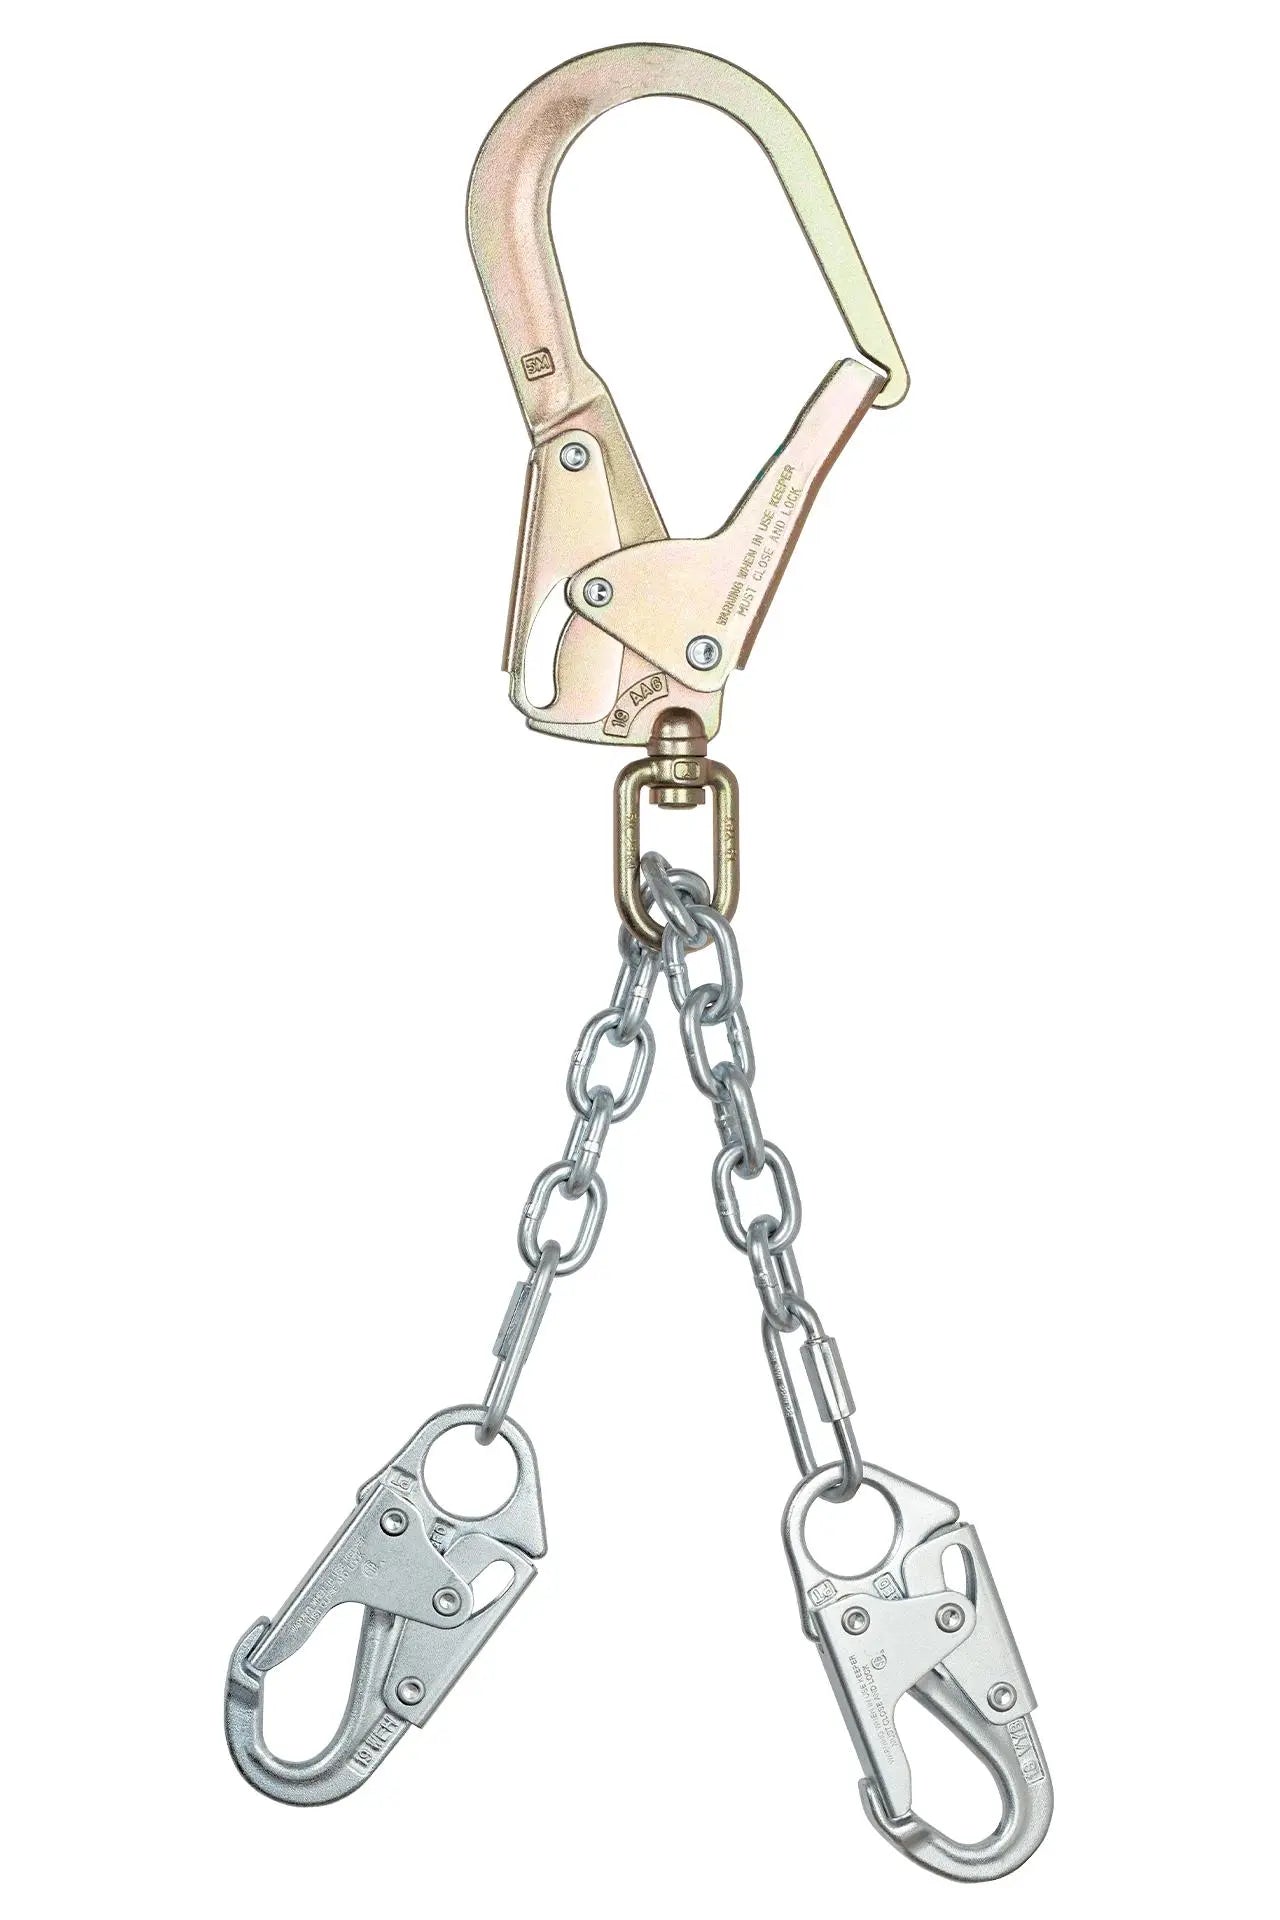 FALLTECH - 23" Rebar Positioning Assembly; GR 43 Chain with Swivel Rebar Hook - Becker Safety and Supply